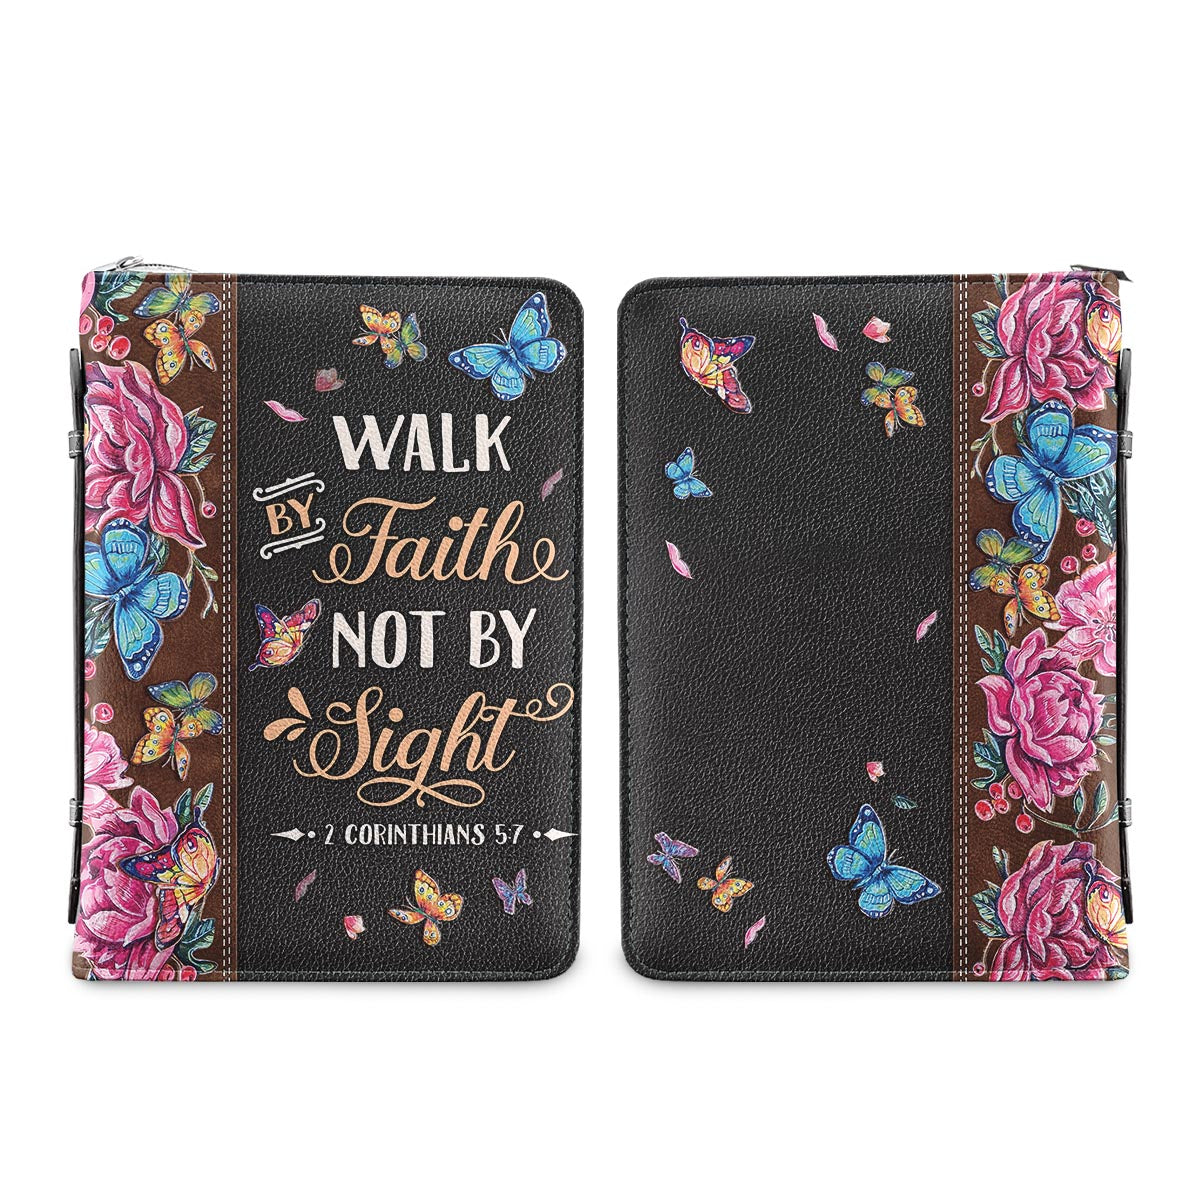 Walk By Faith Not By Sight 2 Corinthians 5 7 Butterfly Leather Style Personalized Bible Cover - Inspirational Bible Covers For Women